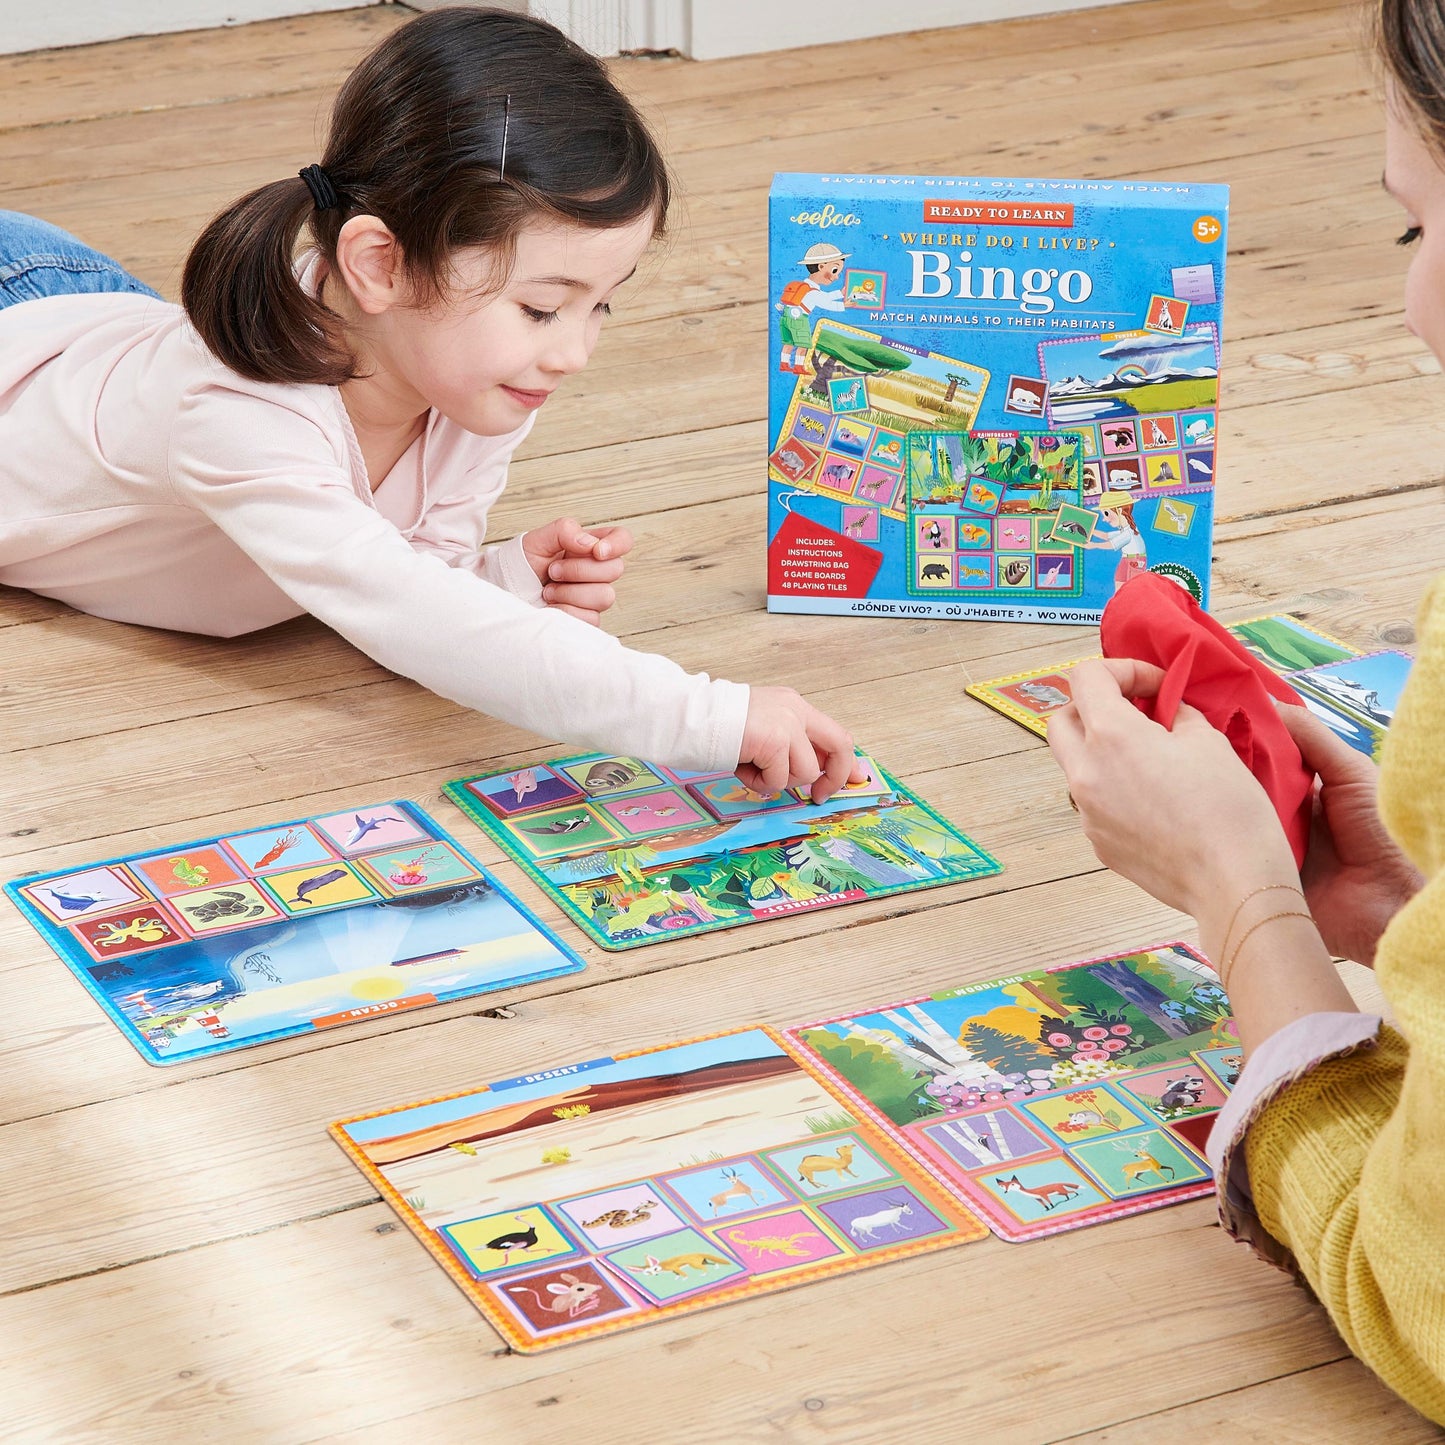 Where Do I Live? Bingo | Fun Educational Gifts for Kids Ages 5+